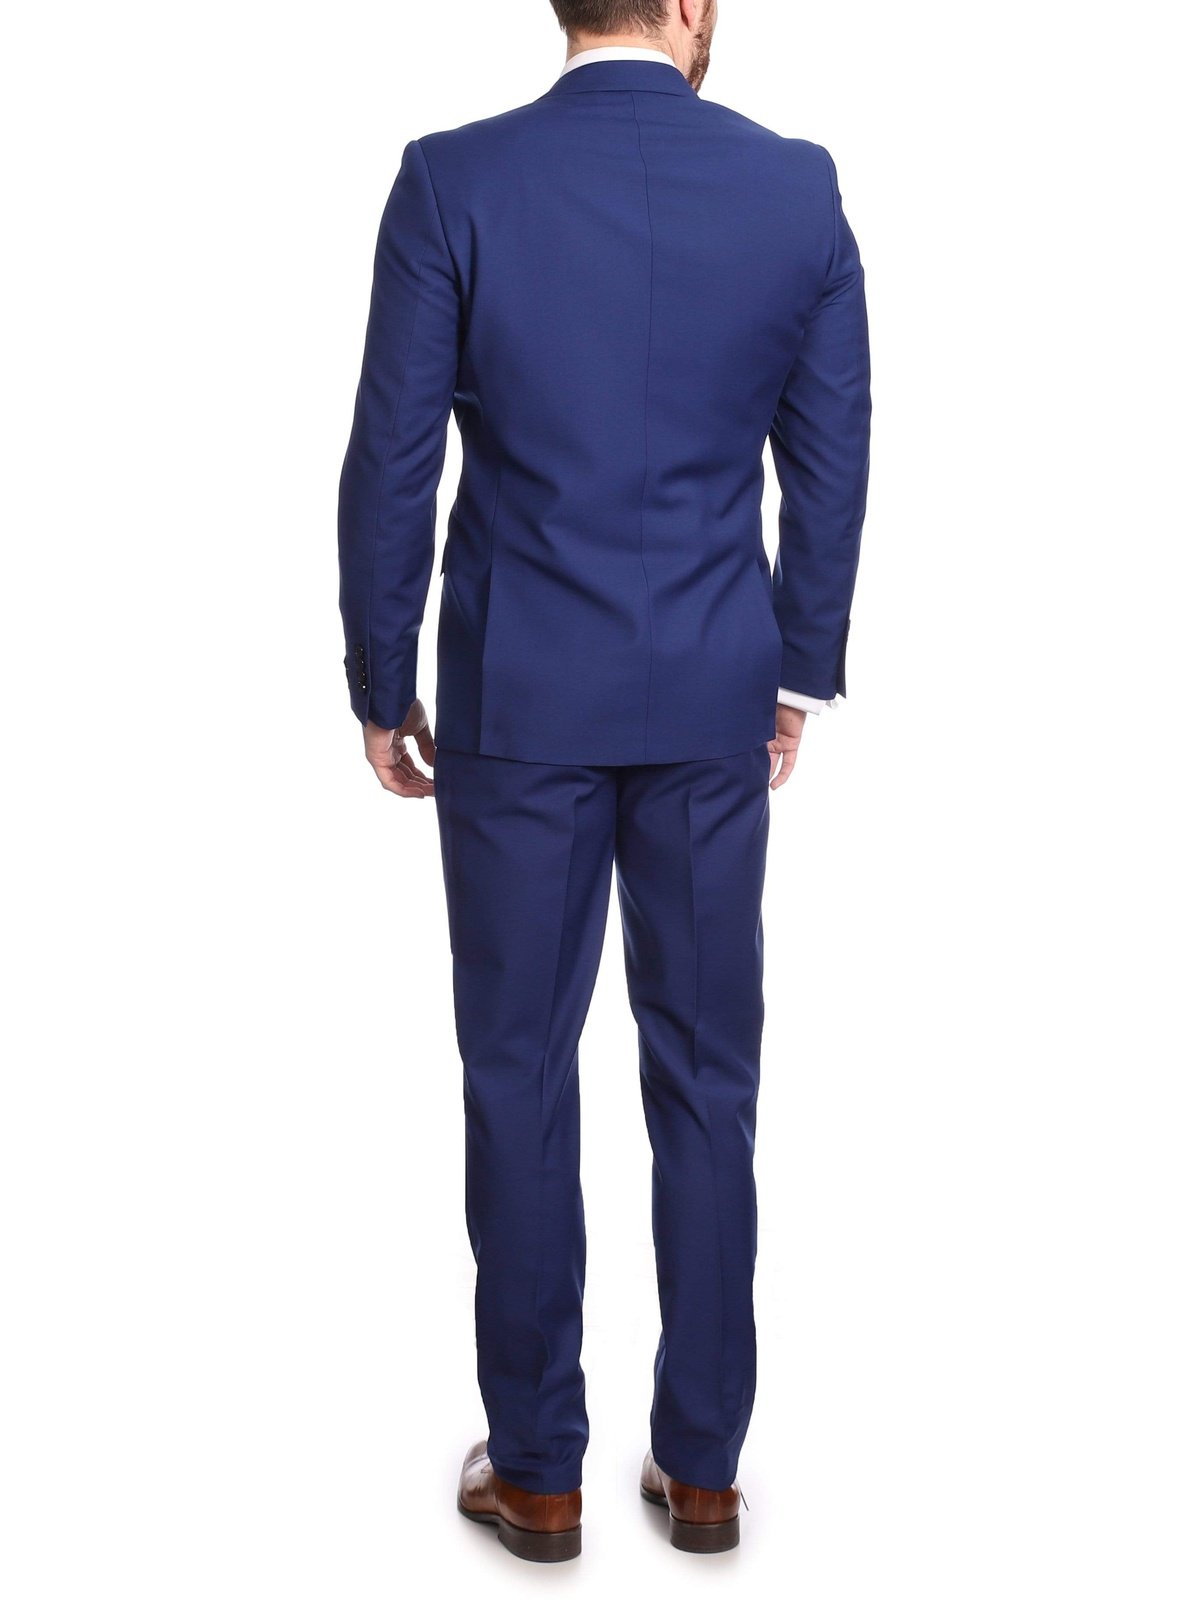 Raphael Bestselling Items Men's Raphael Slim Fit Solid French Medium Blue Two Button 2 Piece Formal Suit